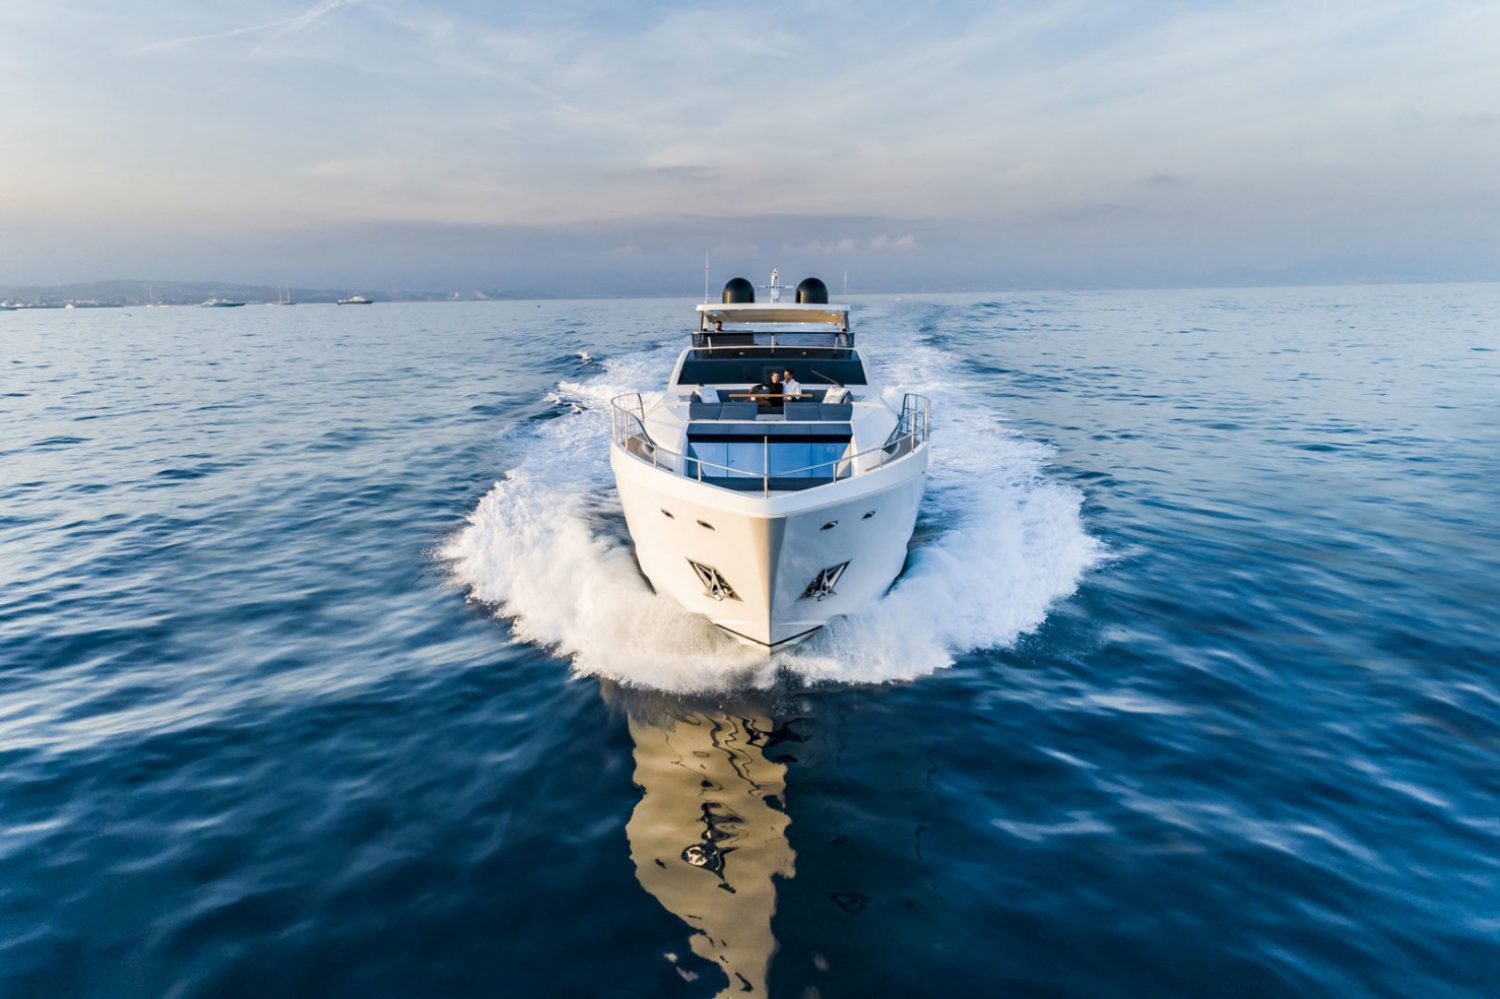 Get To Know 2020's Fort Lauderdale International Boat Show